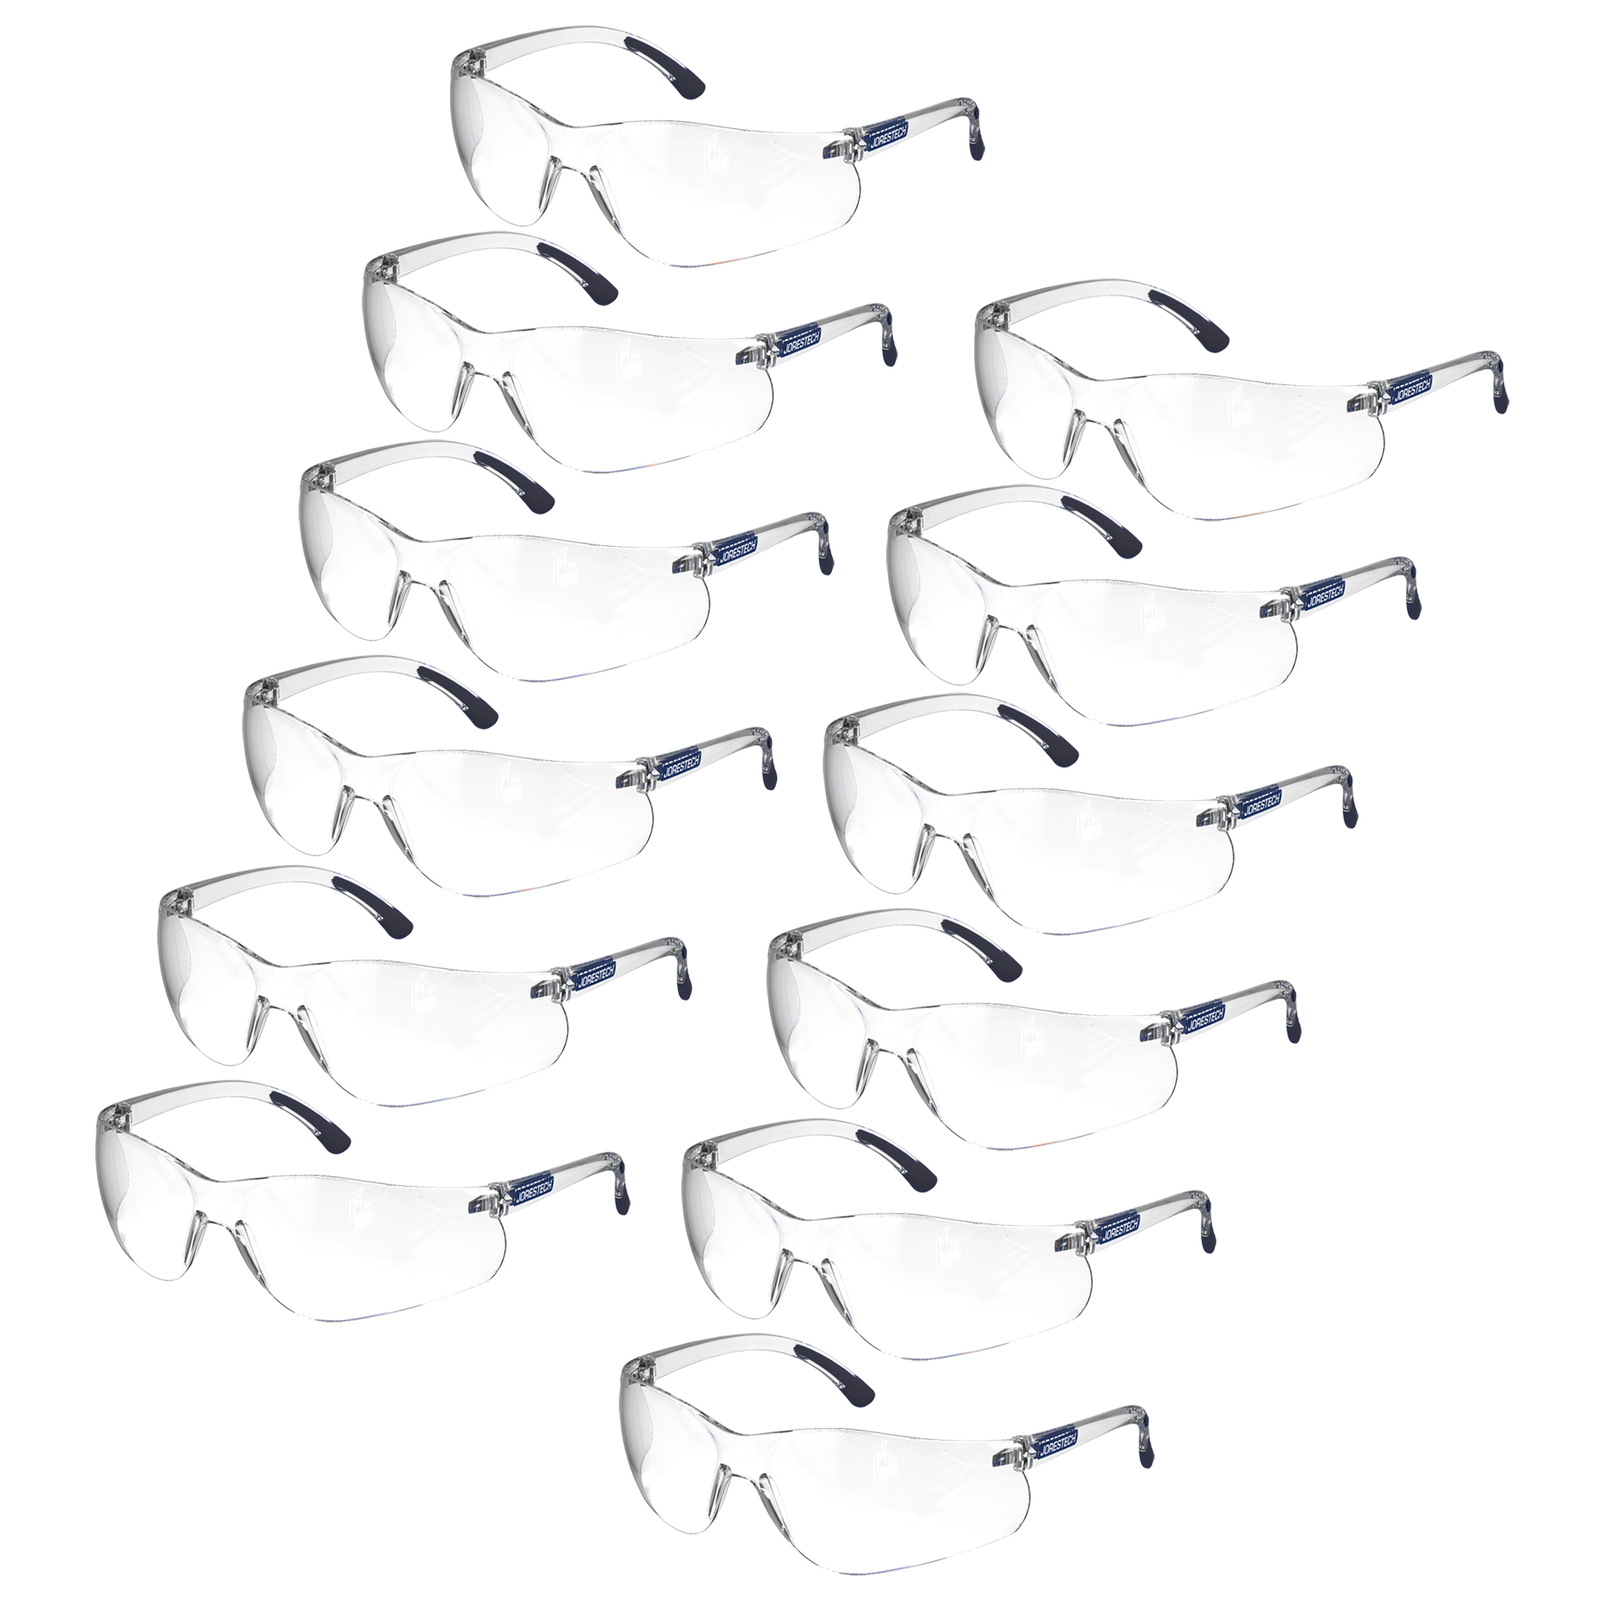 Set of 12 JORESTECH safety glasses for high impact protection